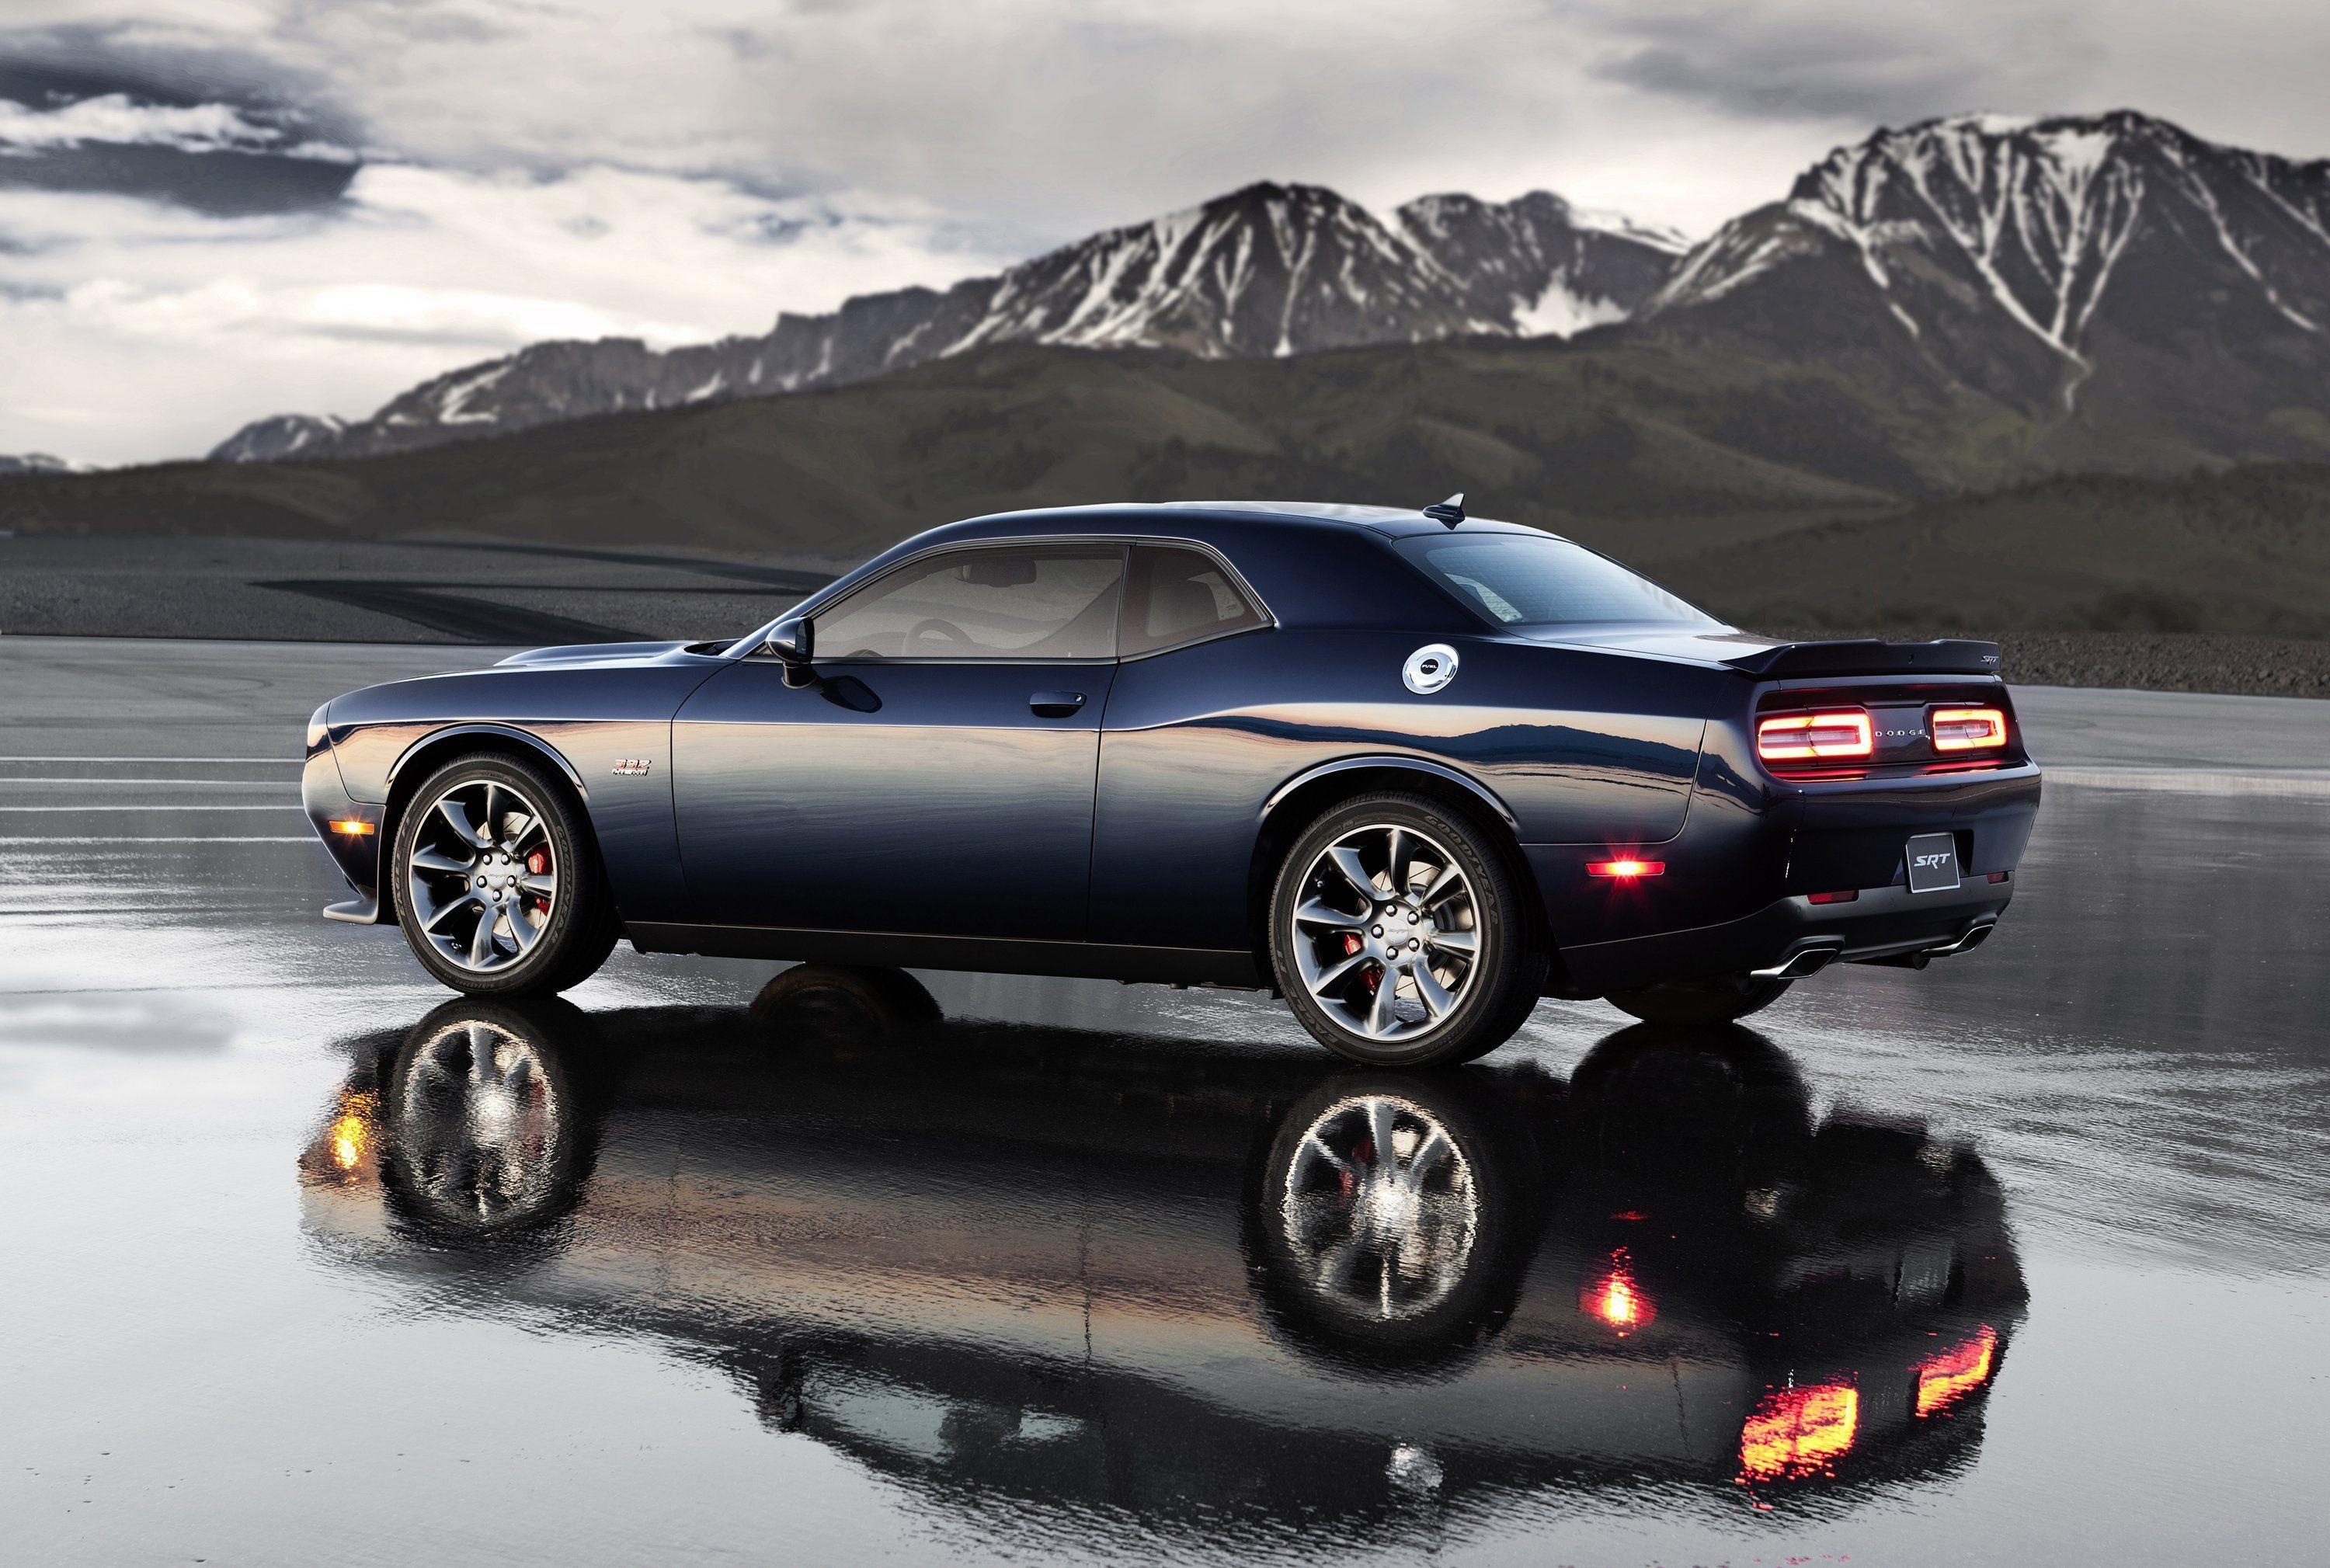 Dodge, Black Challenger wallpapers, Stylish backgrounds, Top-rated, 3000x2020 HD Desktop